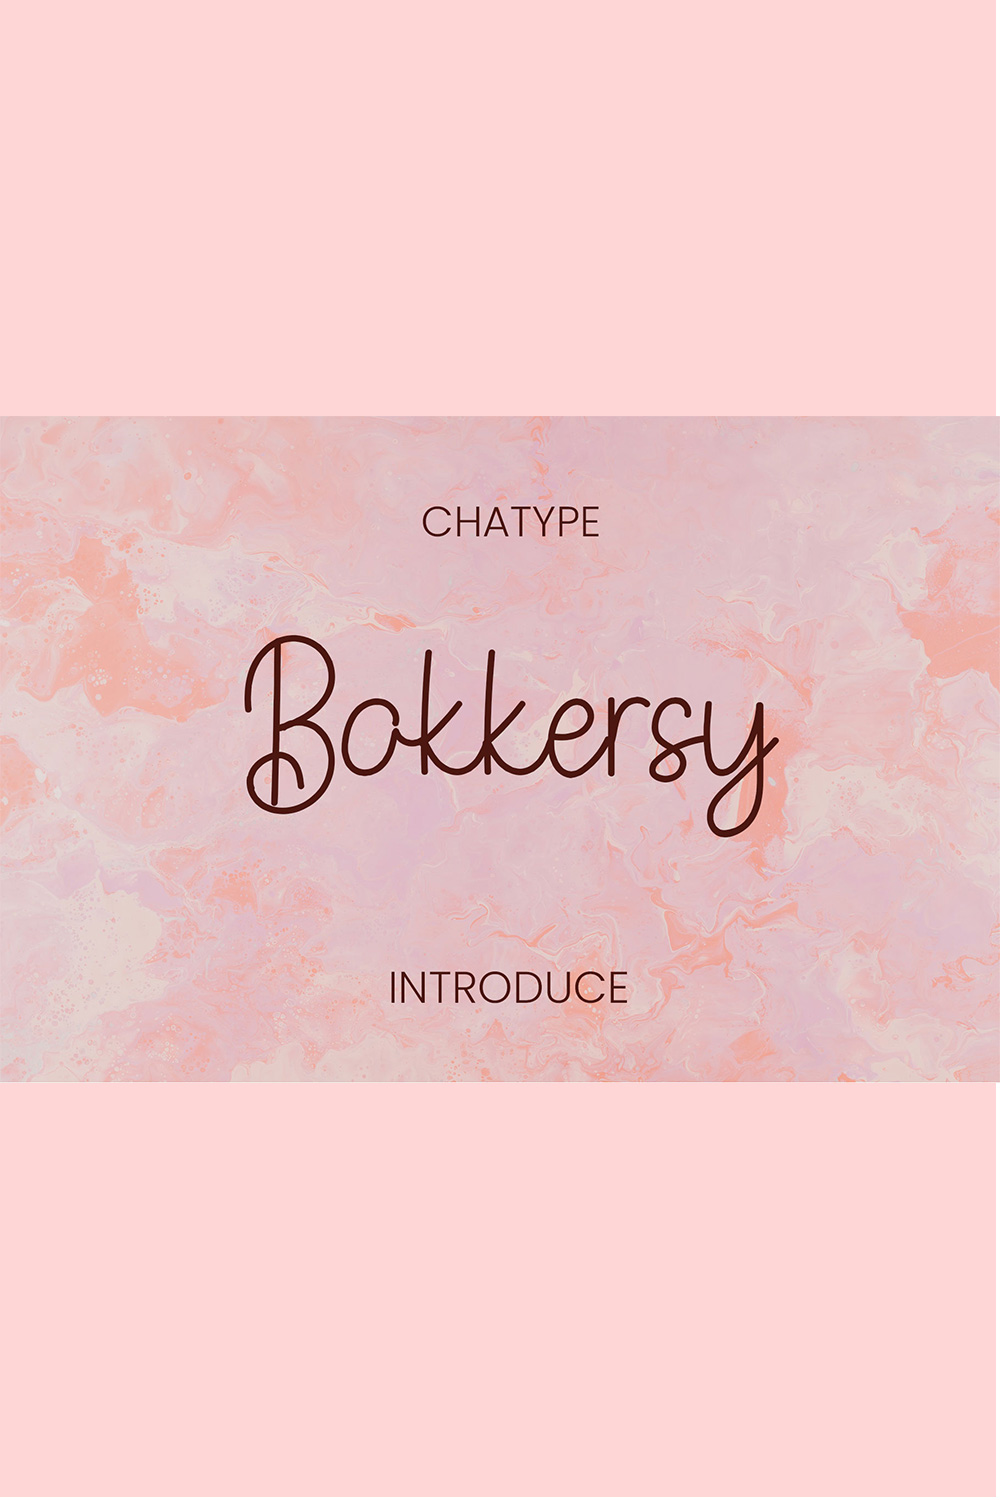 An image with text showing off the fabulous Bokkersy font